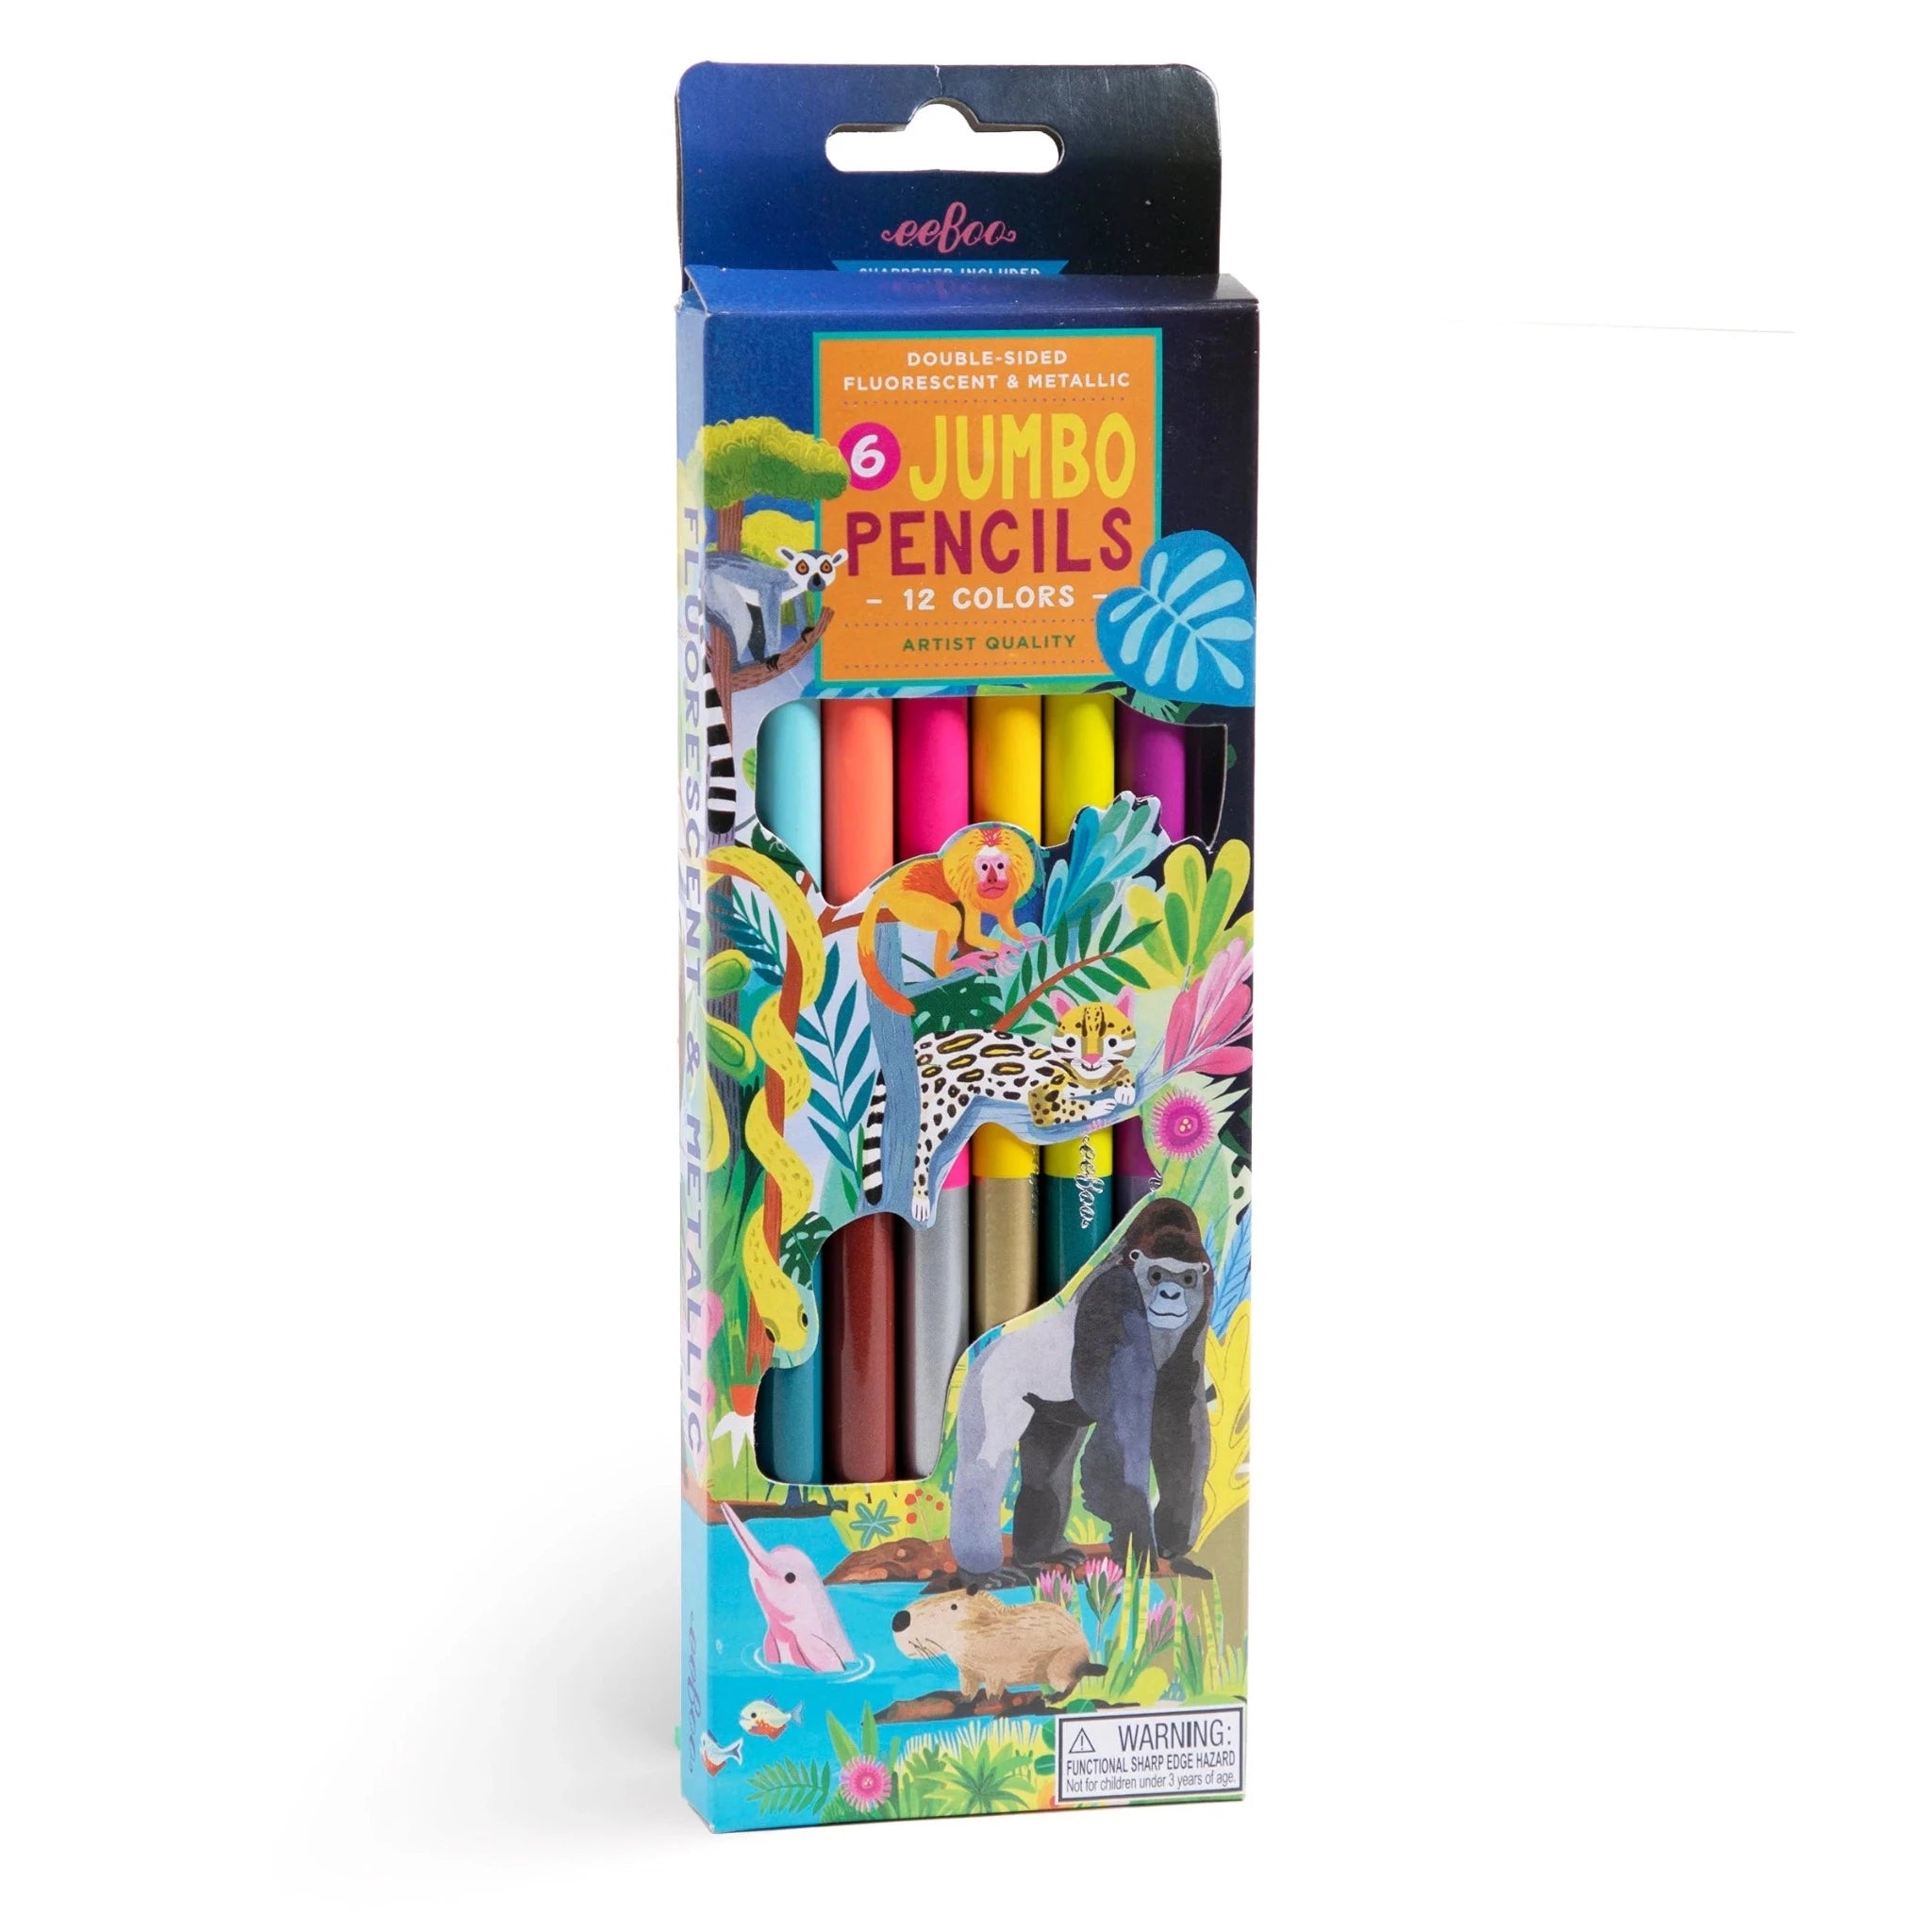 Rainforest 6 jumbo double sided colored Pencils